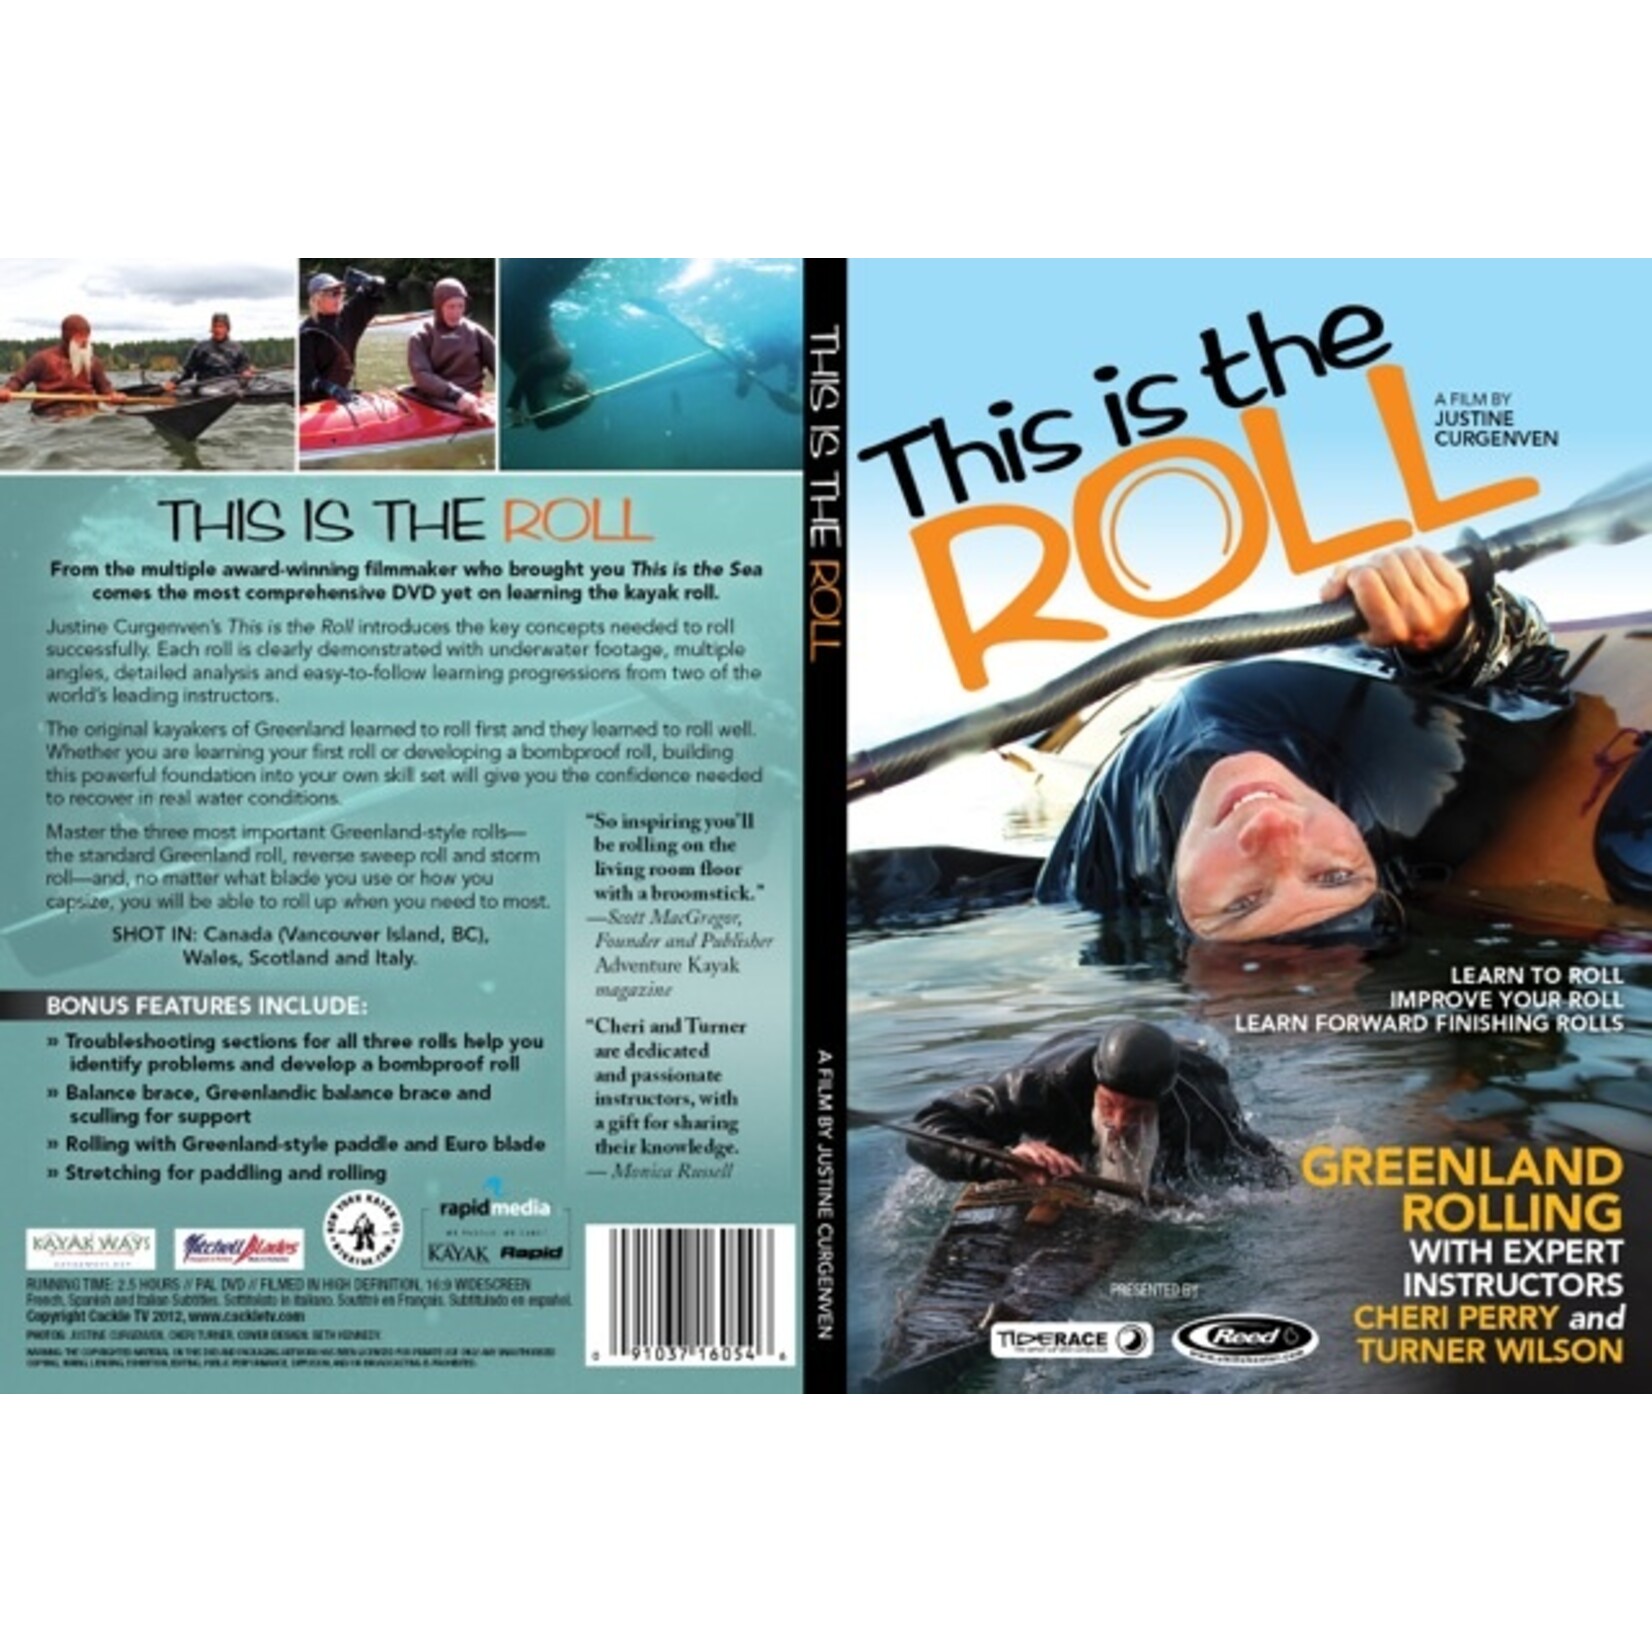 Cackle - This is the Roll 1 - DVD